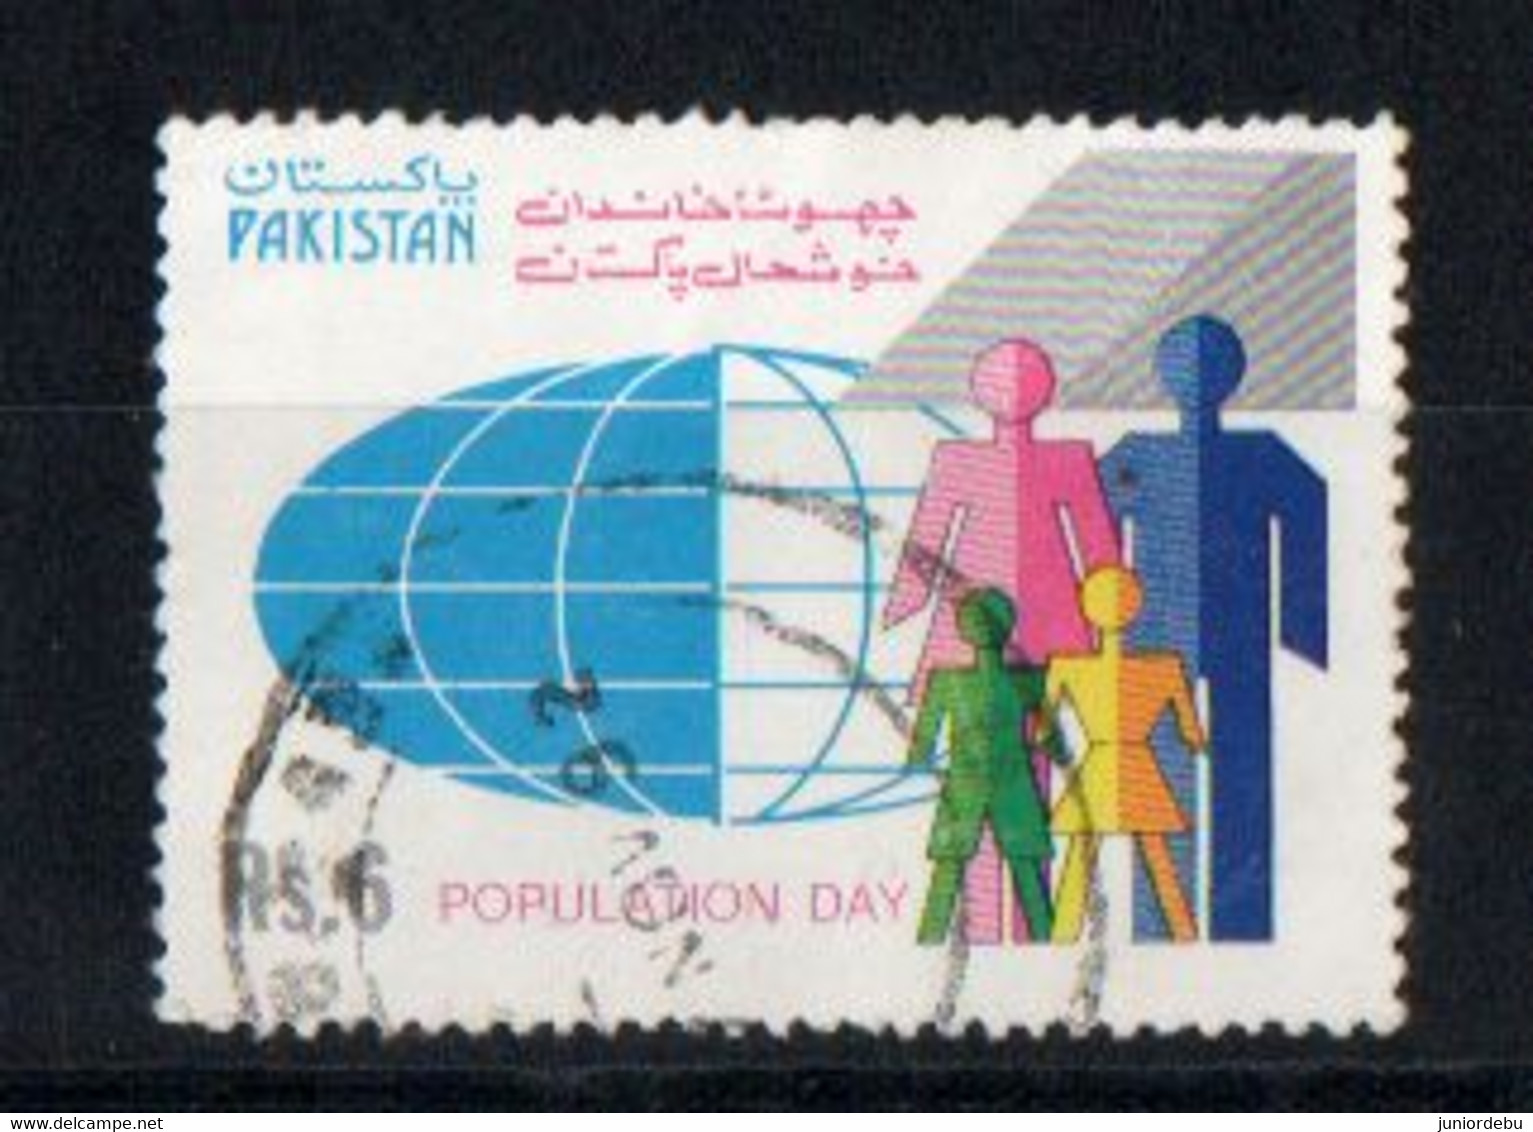 Pakistan - 1992 - Population Day   - Used. Condition As Per Scan. - Pakistan